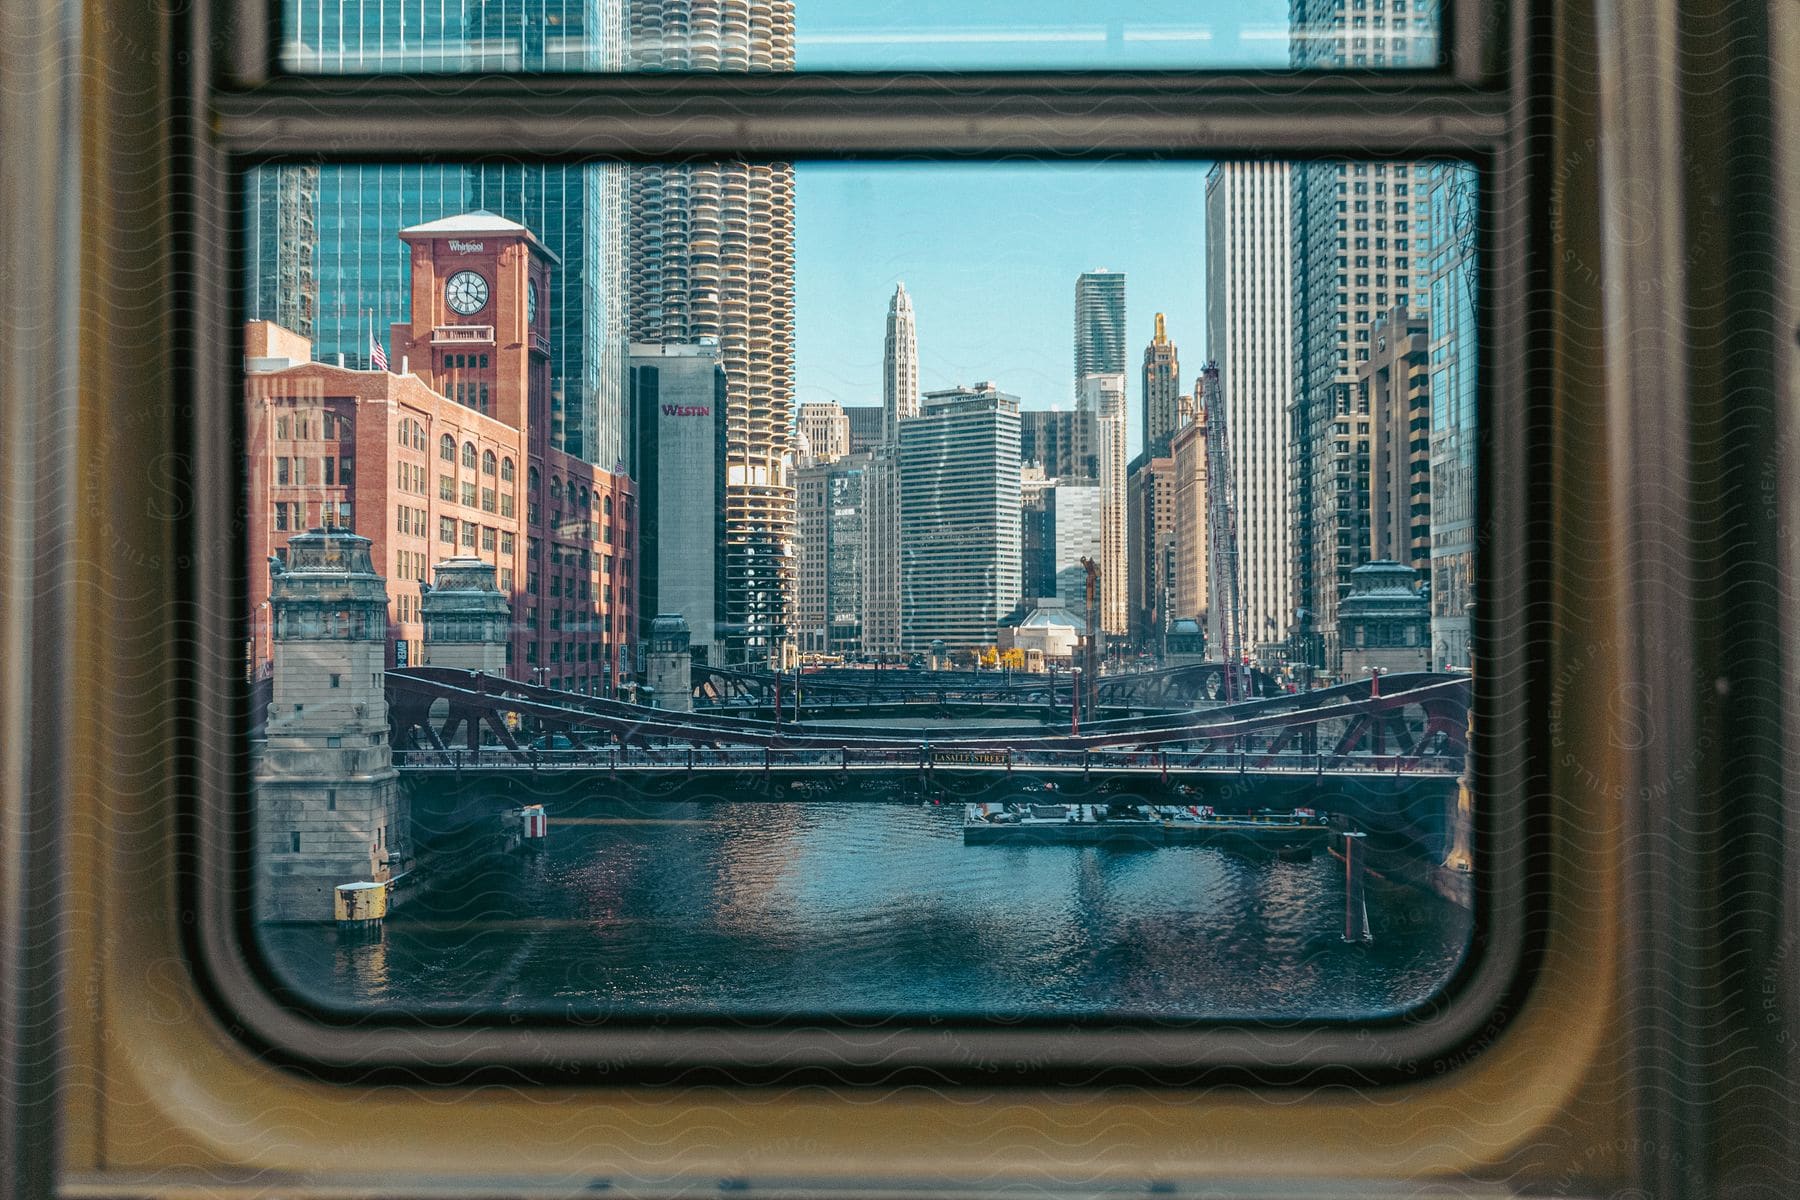 The view from a train window reveals a vibrant cityscape with skyscrapers, a river and a bridge.